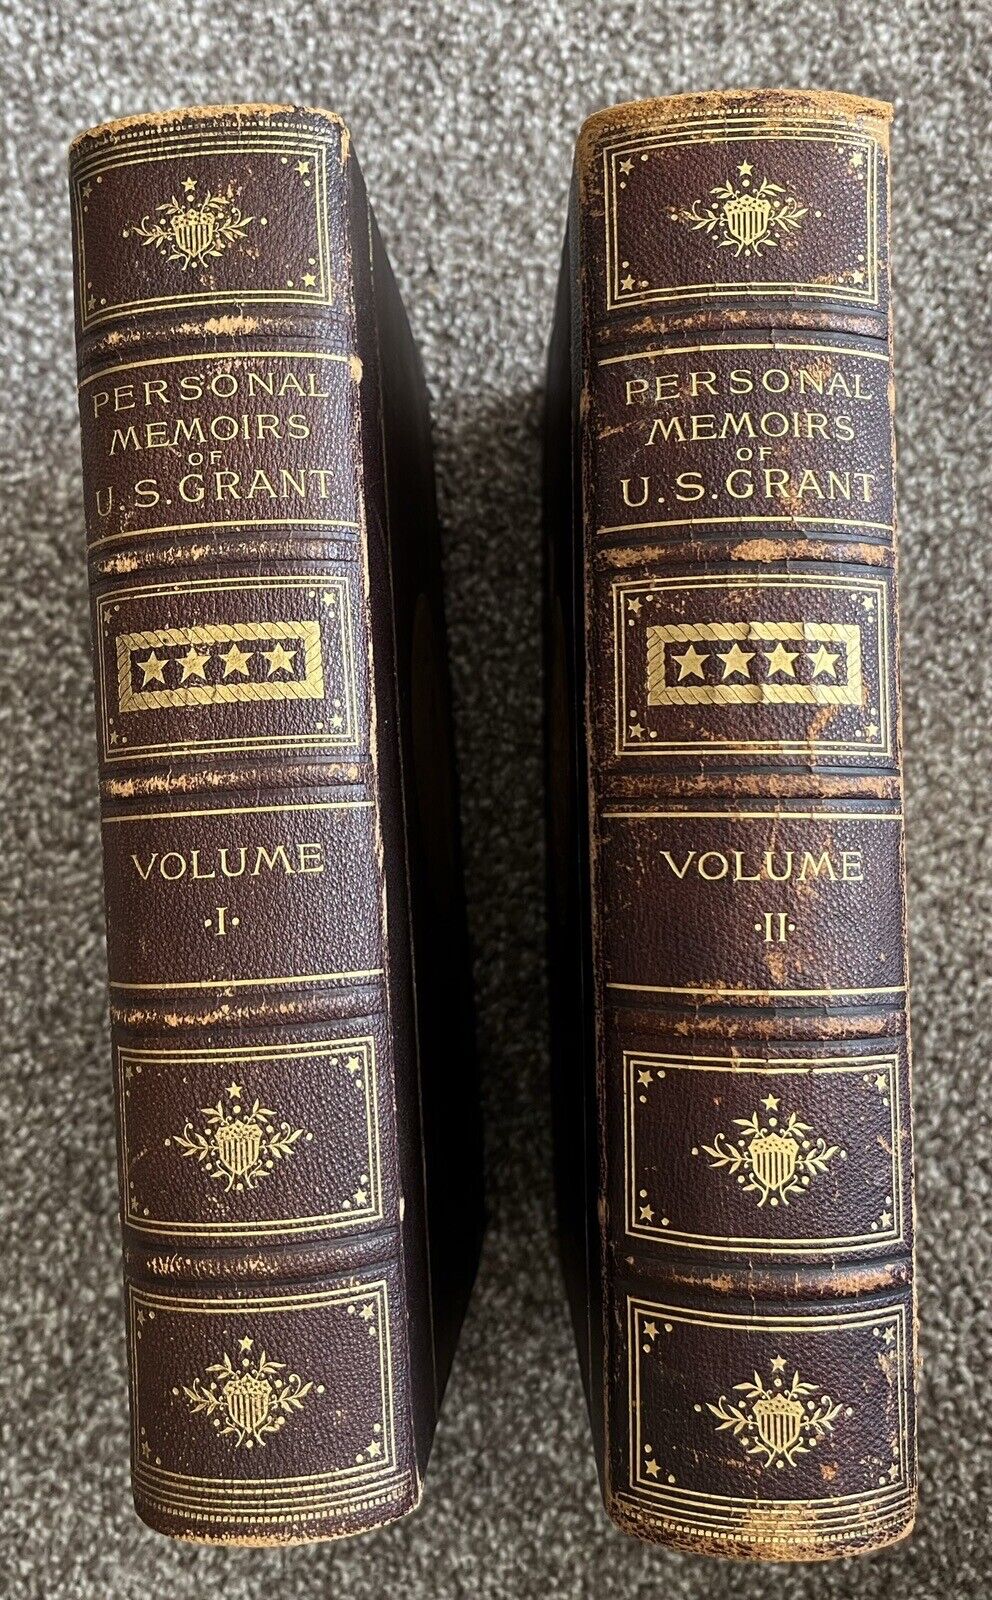 Ist. Edition, PERSONAL MEMOIRS OF U. S. GRANT